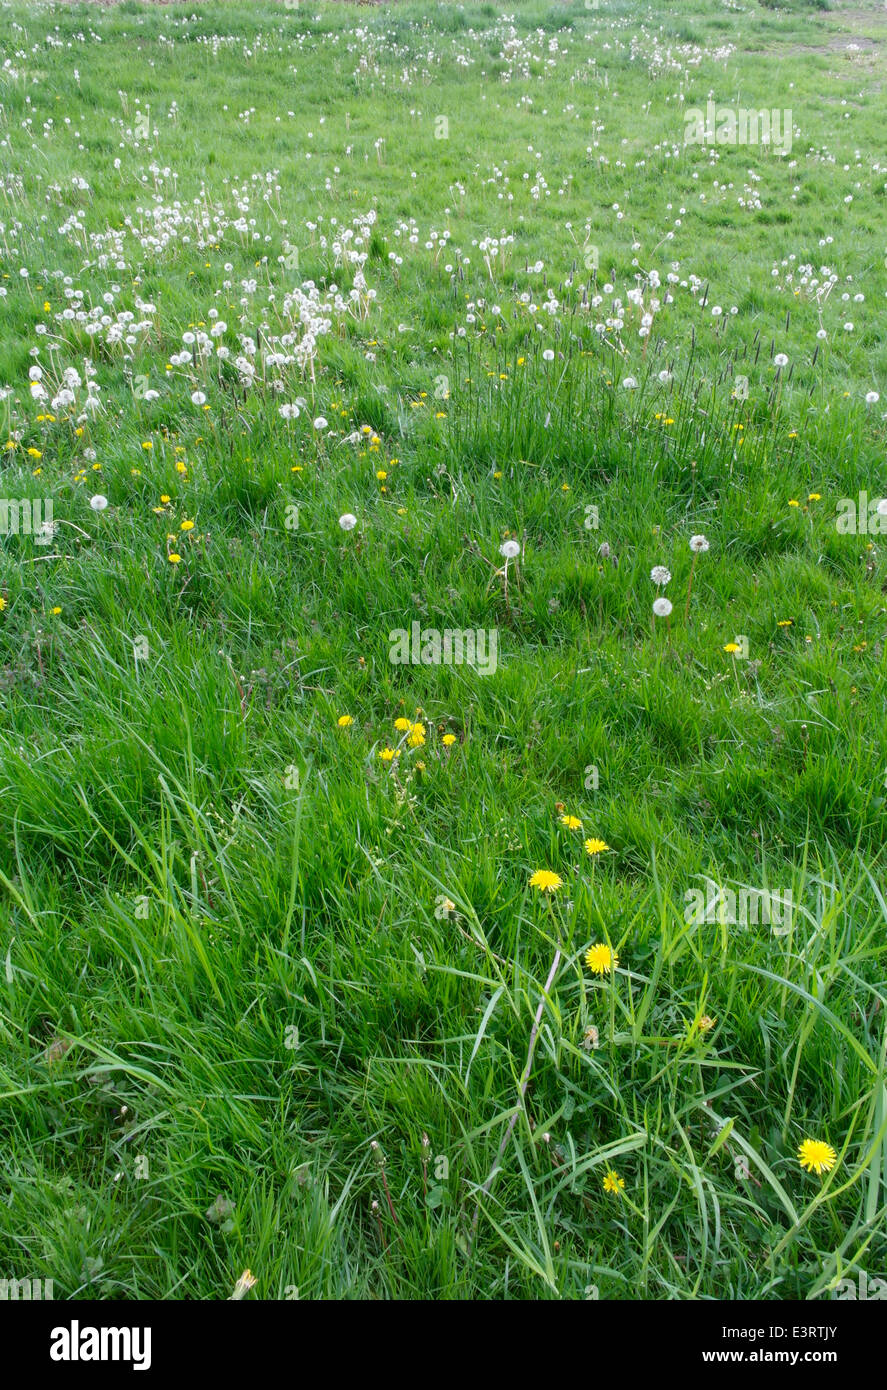 Field of long green blades of grass and yellow dandelion flowers and fluffy white seed heads. Stock Photo